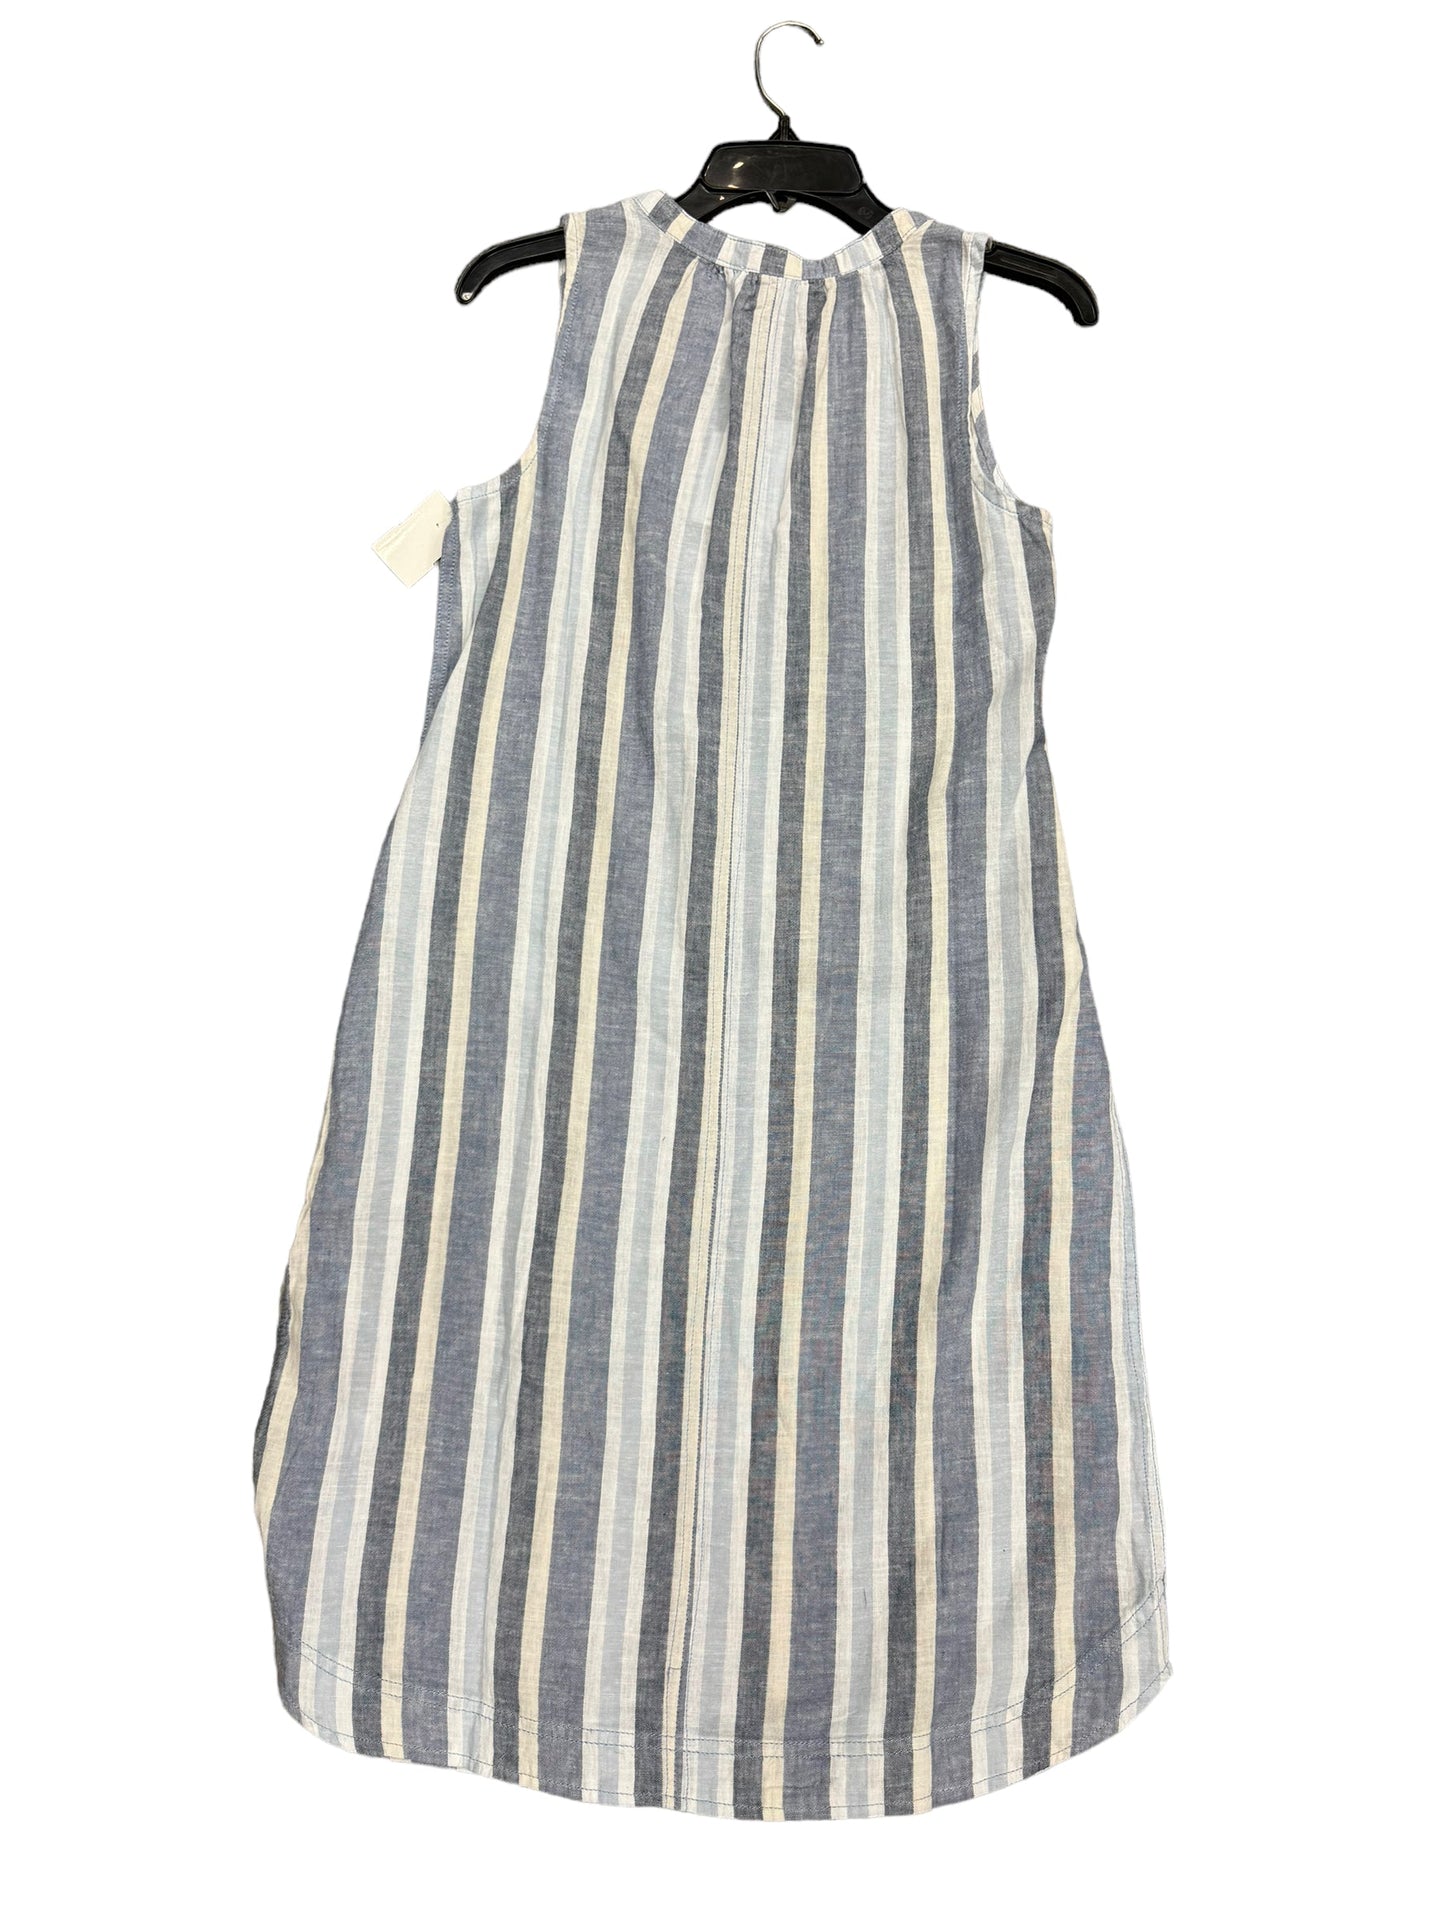 Dress Casual Midi By Beachlunchlounge  Size: 2